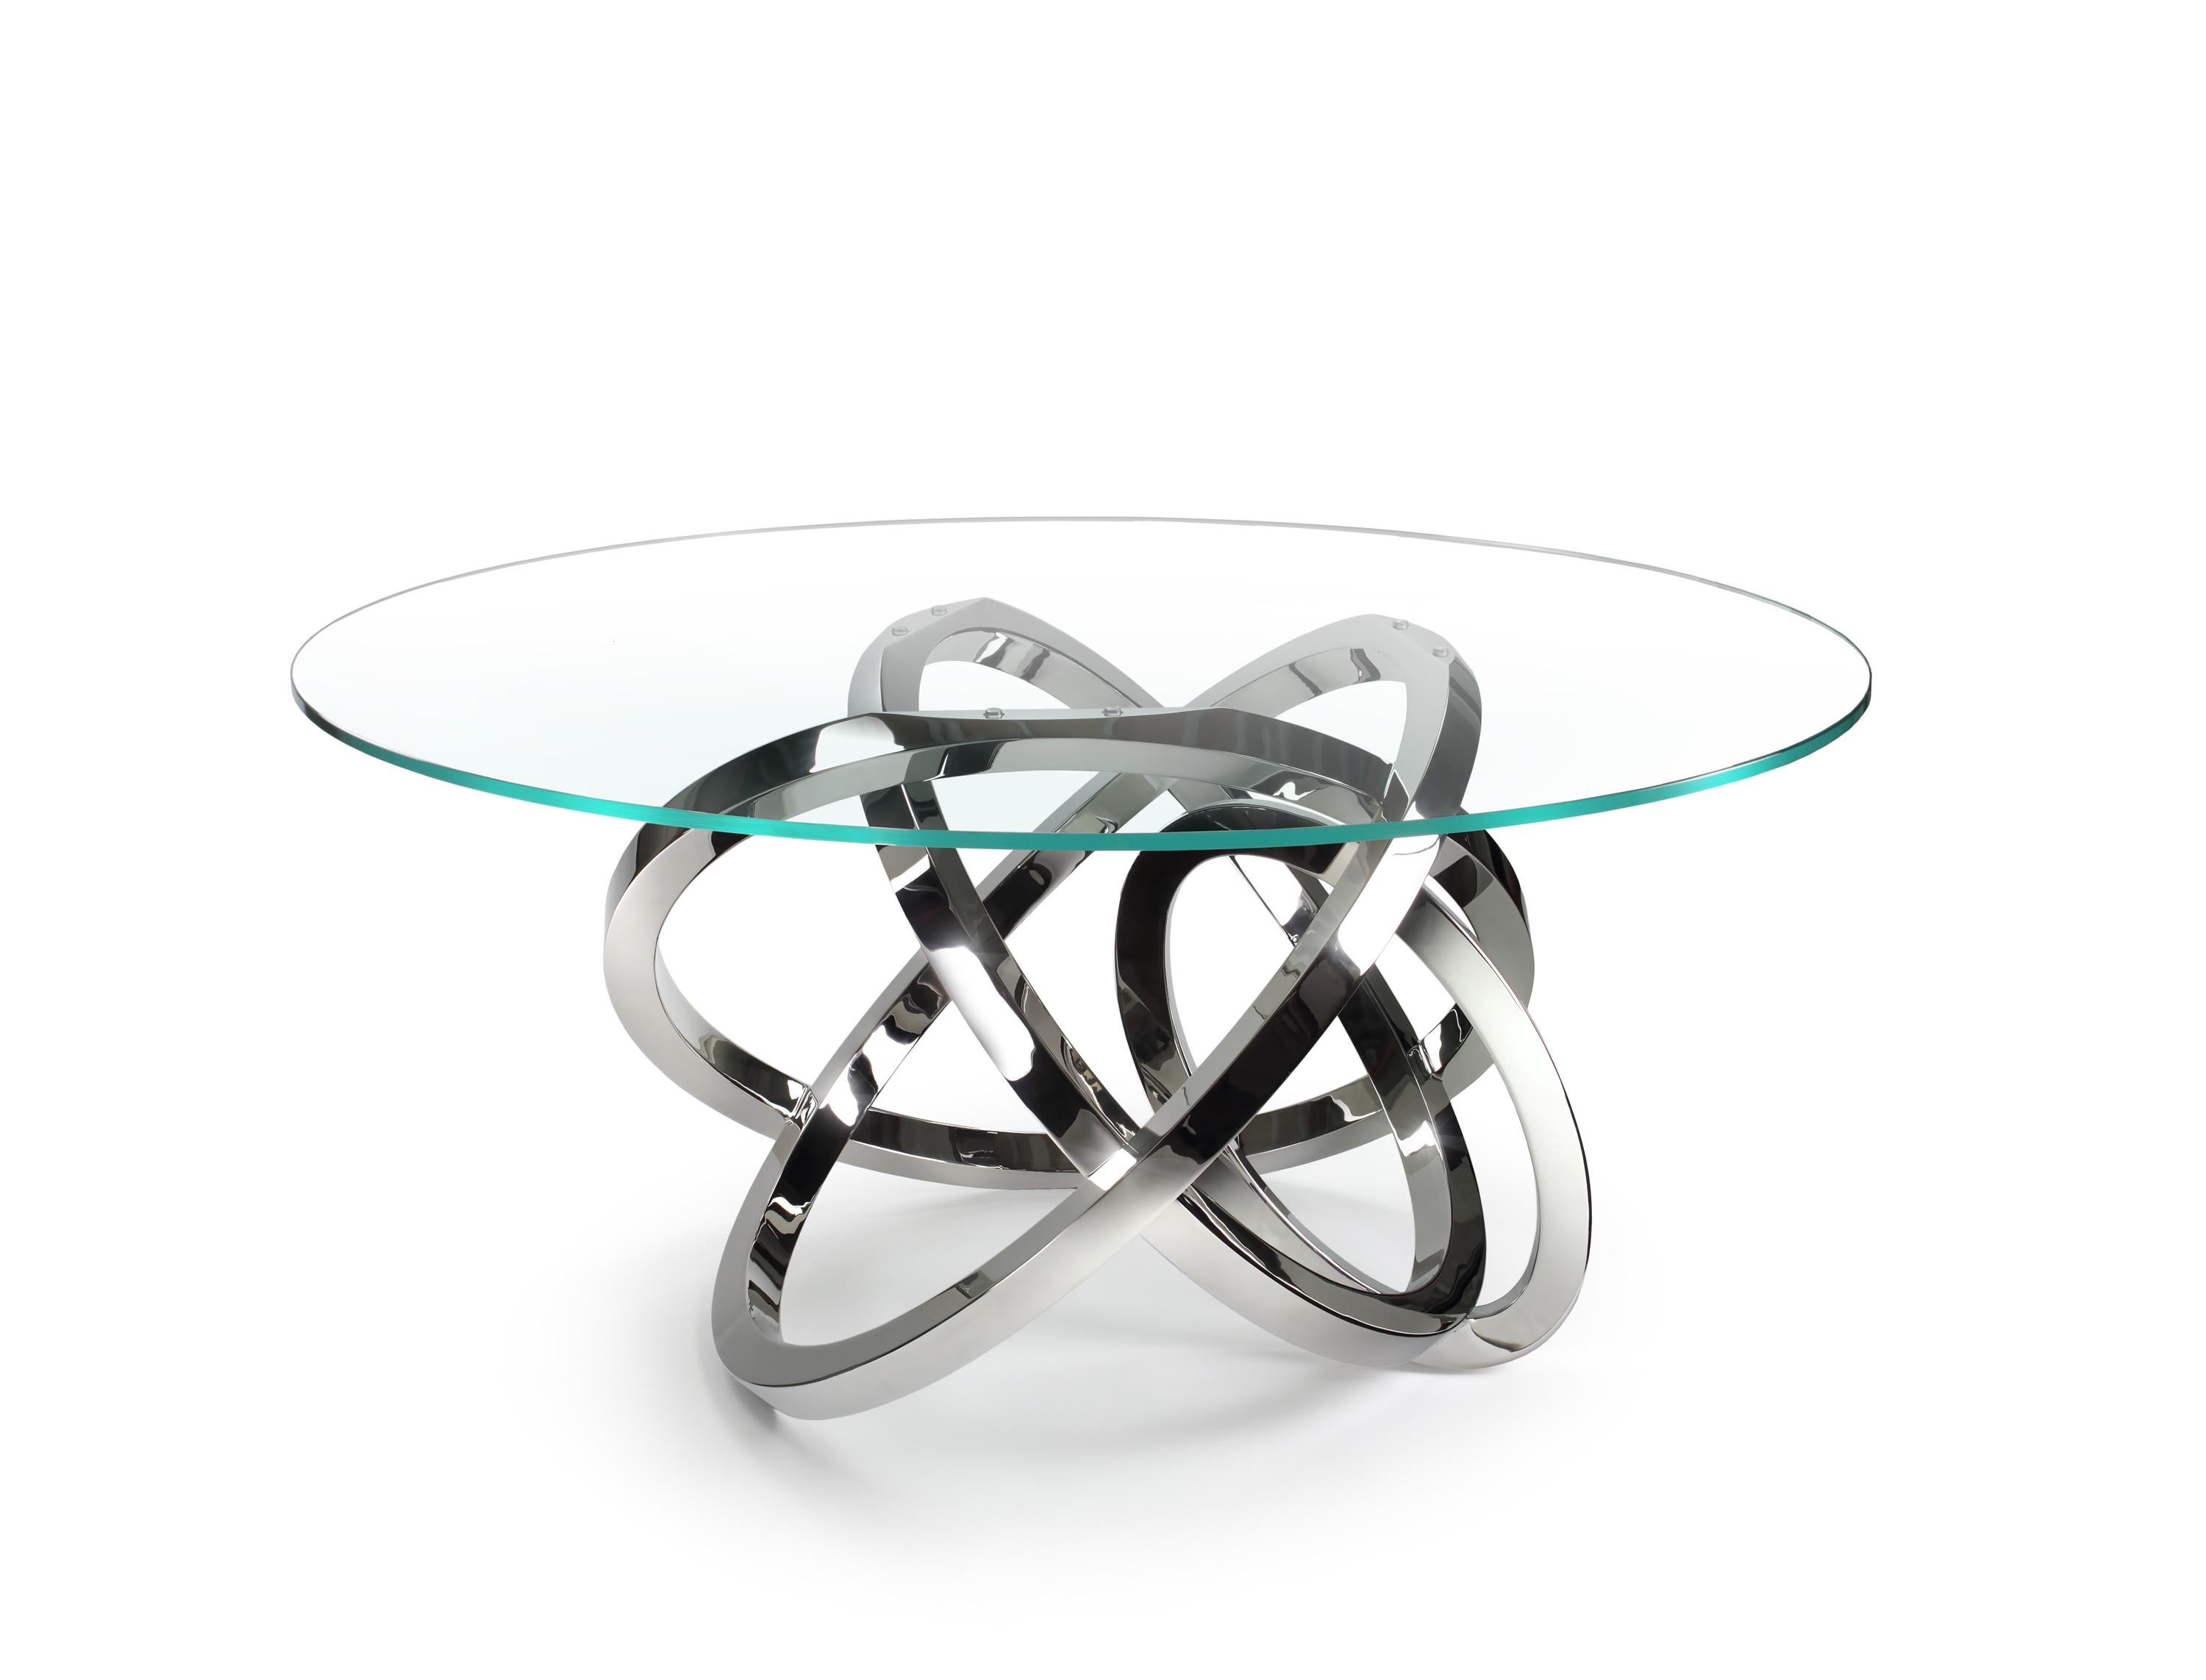 The dining table 'Perseo' is an eye-catching table with structure in mirror polished stainless steel and top in extra-clear tempered glass. Every single bangle is welded and highly polished by hand. The mirror-like finishing of the steel creates